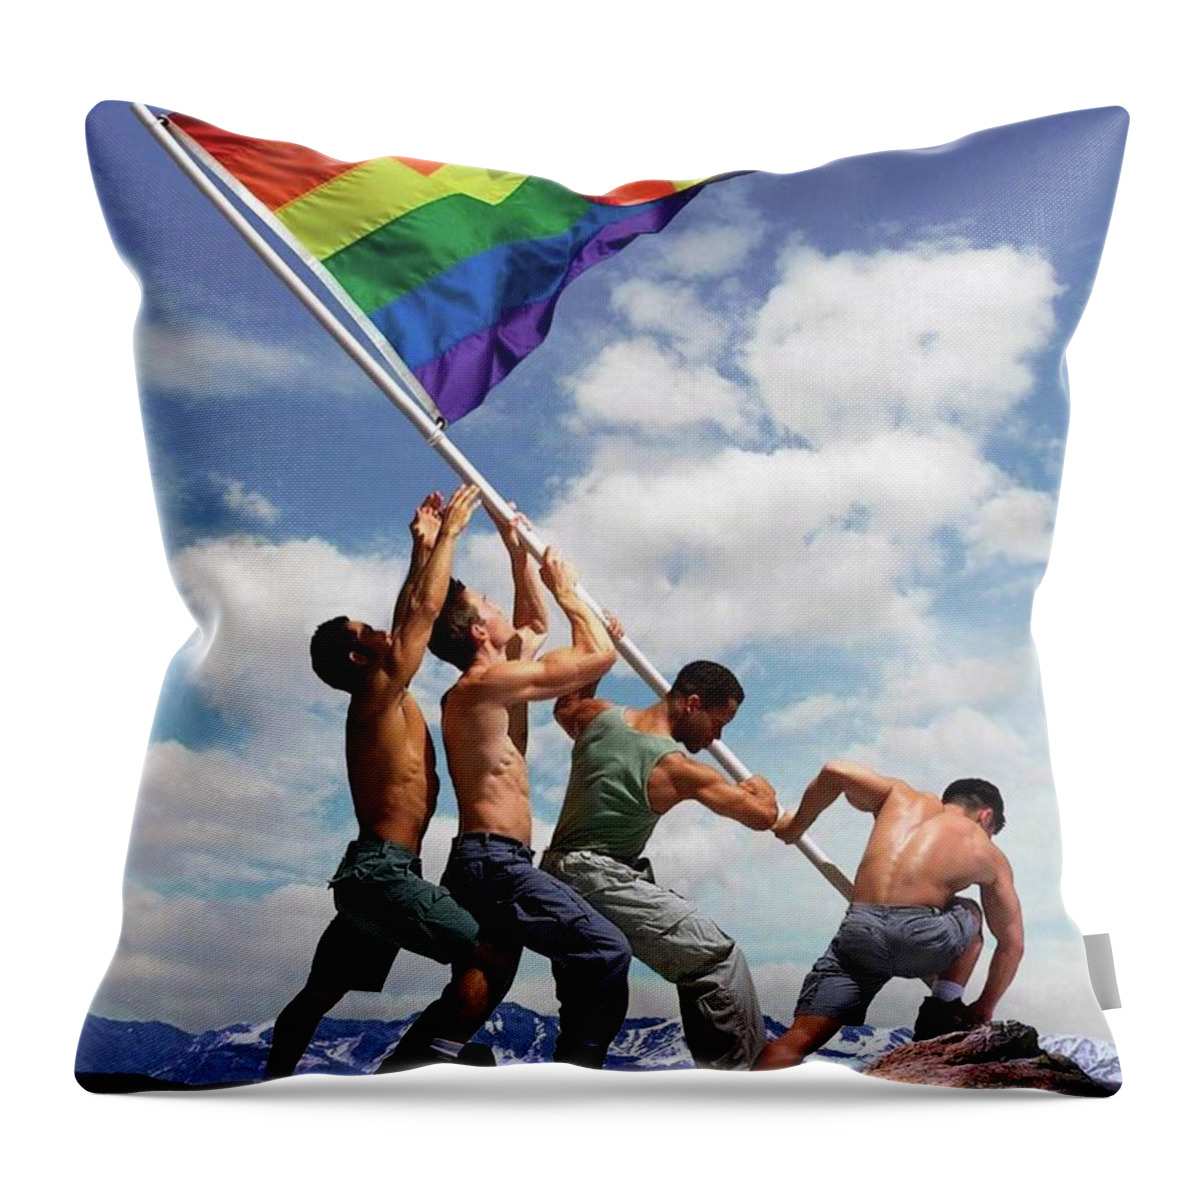 Troy Caperton Throw Pillow featuring the painting Raising the Rainbow Flag by Troy Caperton